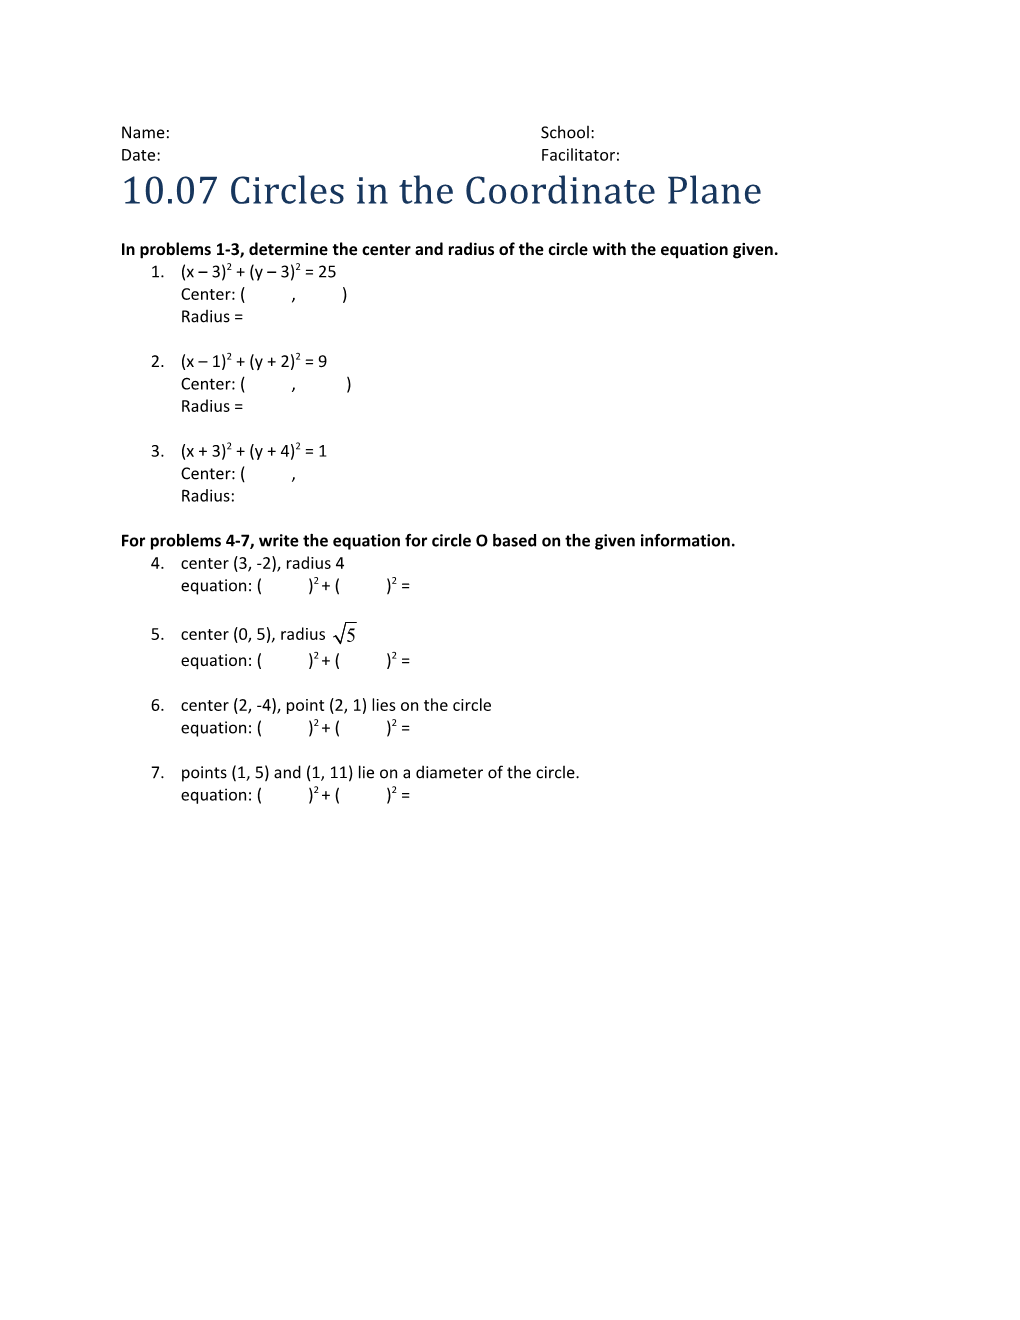 In Problems 1-3, Determine the Center and Radius of the Circle with the Equation Given